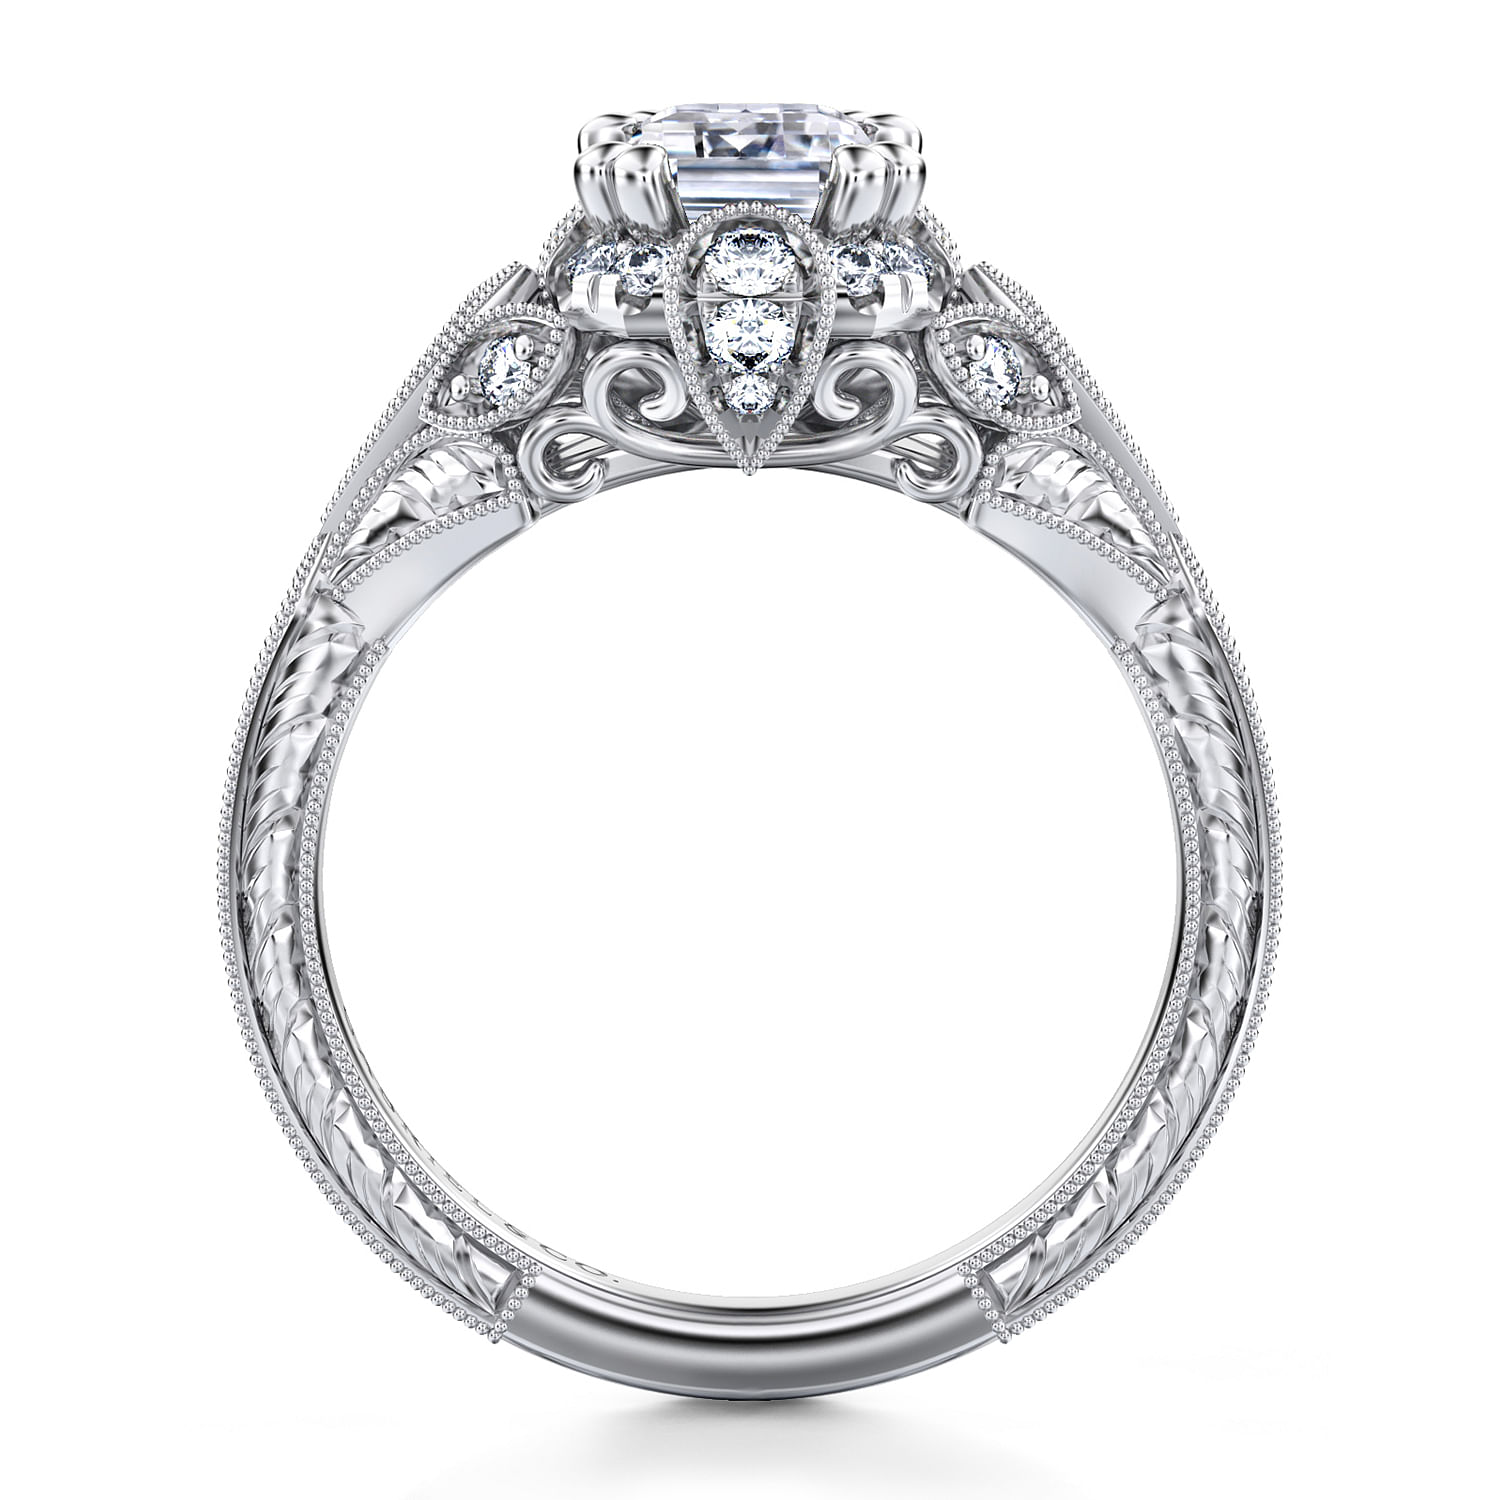 Unique 14K White Gold Vintage Inspired Emerald Cut Diamond Halo Engagement Ring